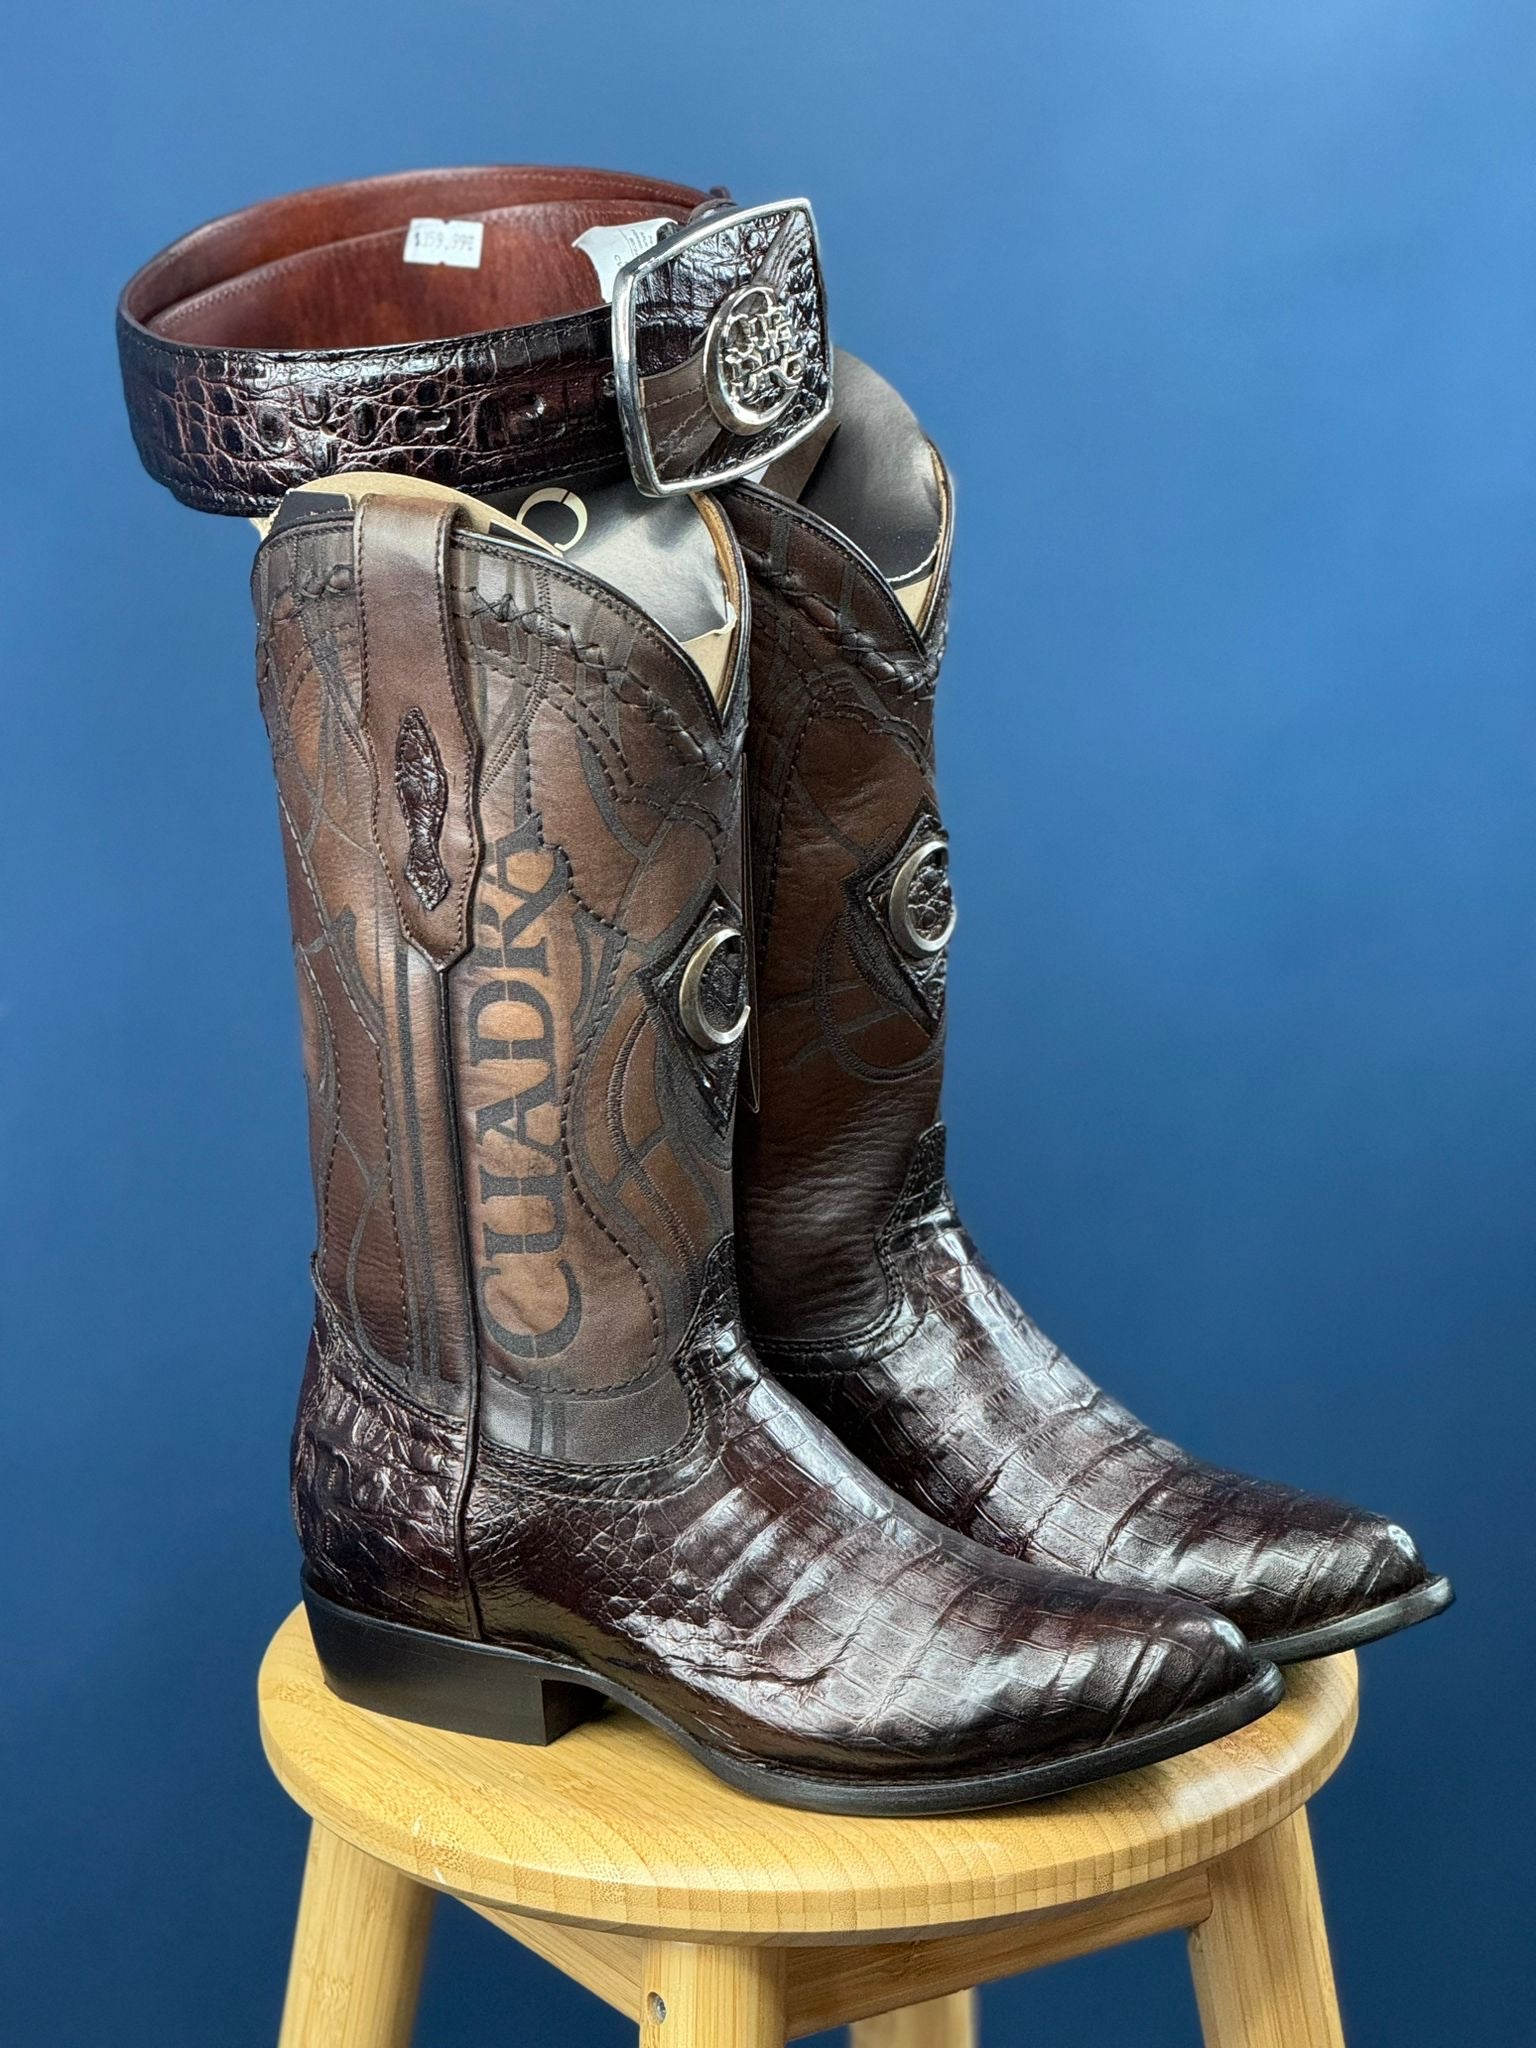 CUADRA BOOT FUSCUS BELLY PARIS CAFE BROWN CAIMAN LASER ROUND TOE2C1NFY